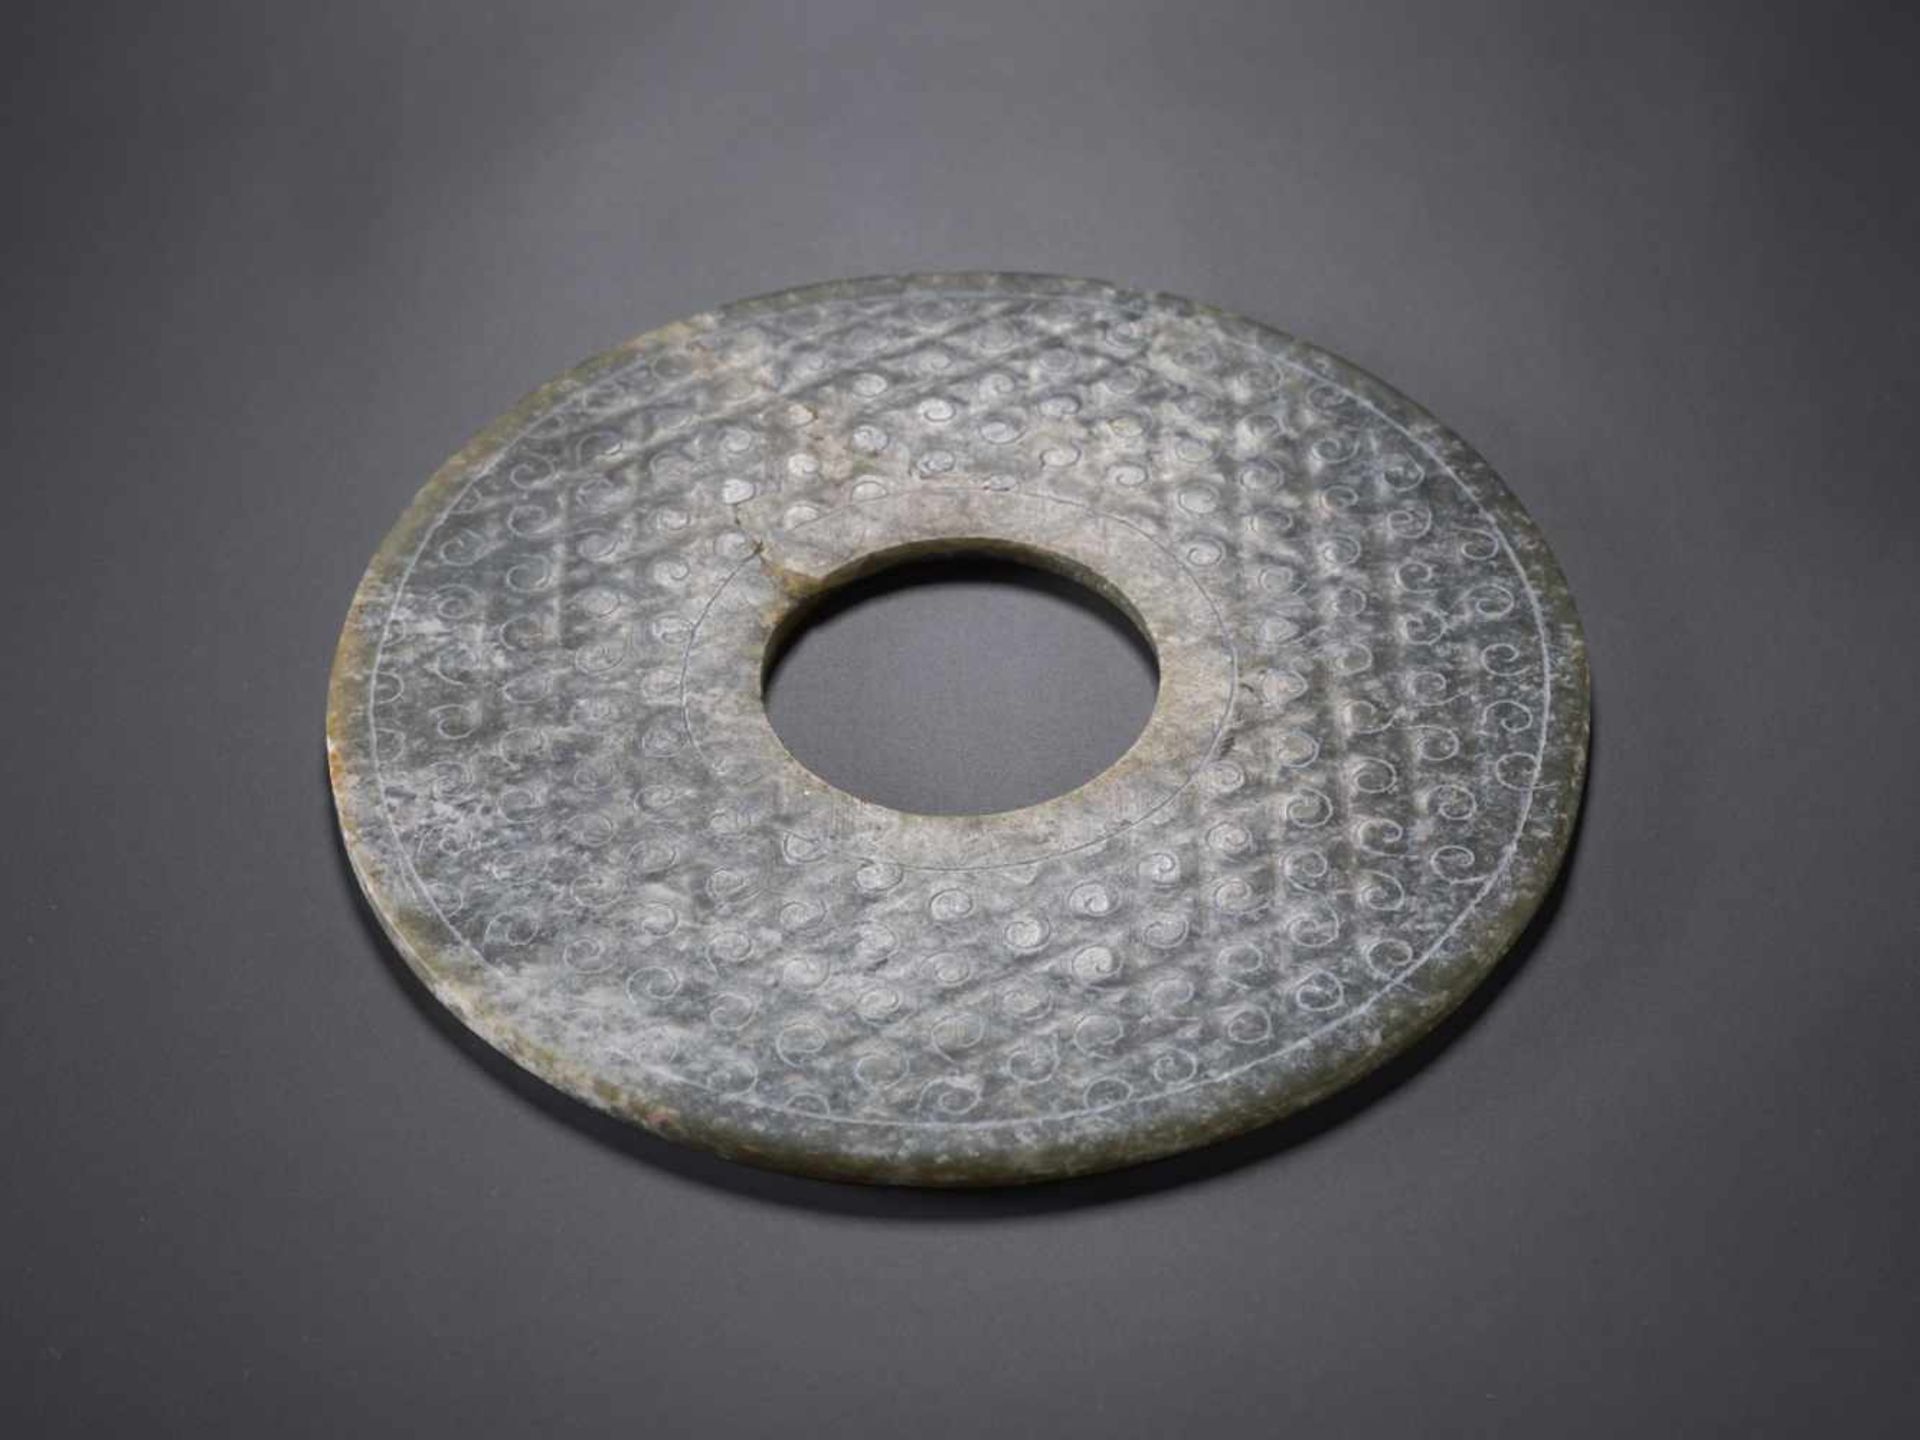 A REFINED CHARCOAL GREY DISC WITH ENGRAVED CURLS Jade. China, Han Dynasty, 2nd century BC 穀紋玉璧 - 漢代, - Image 3 of 8